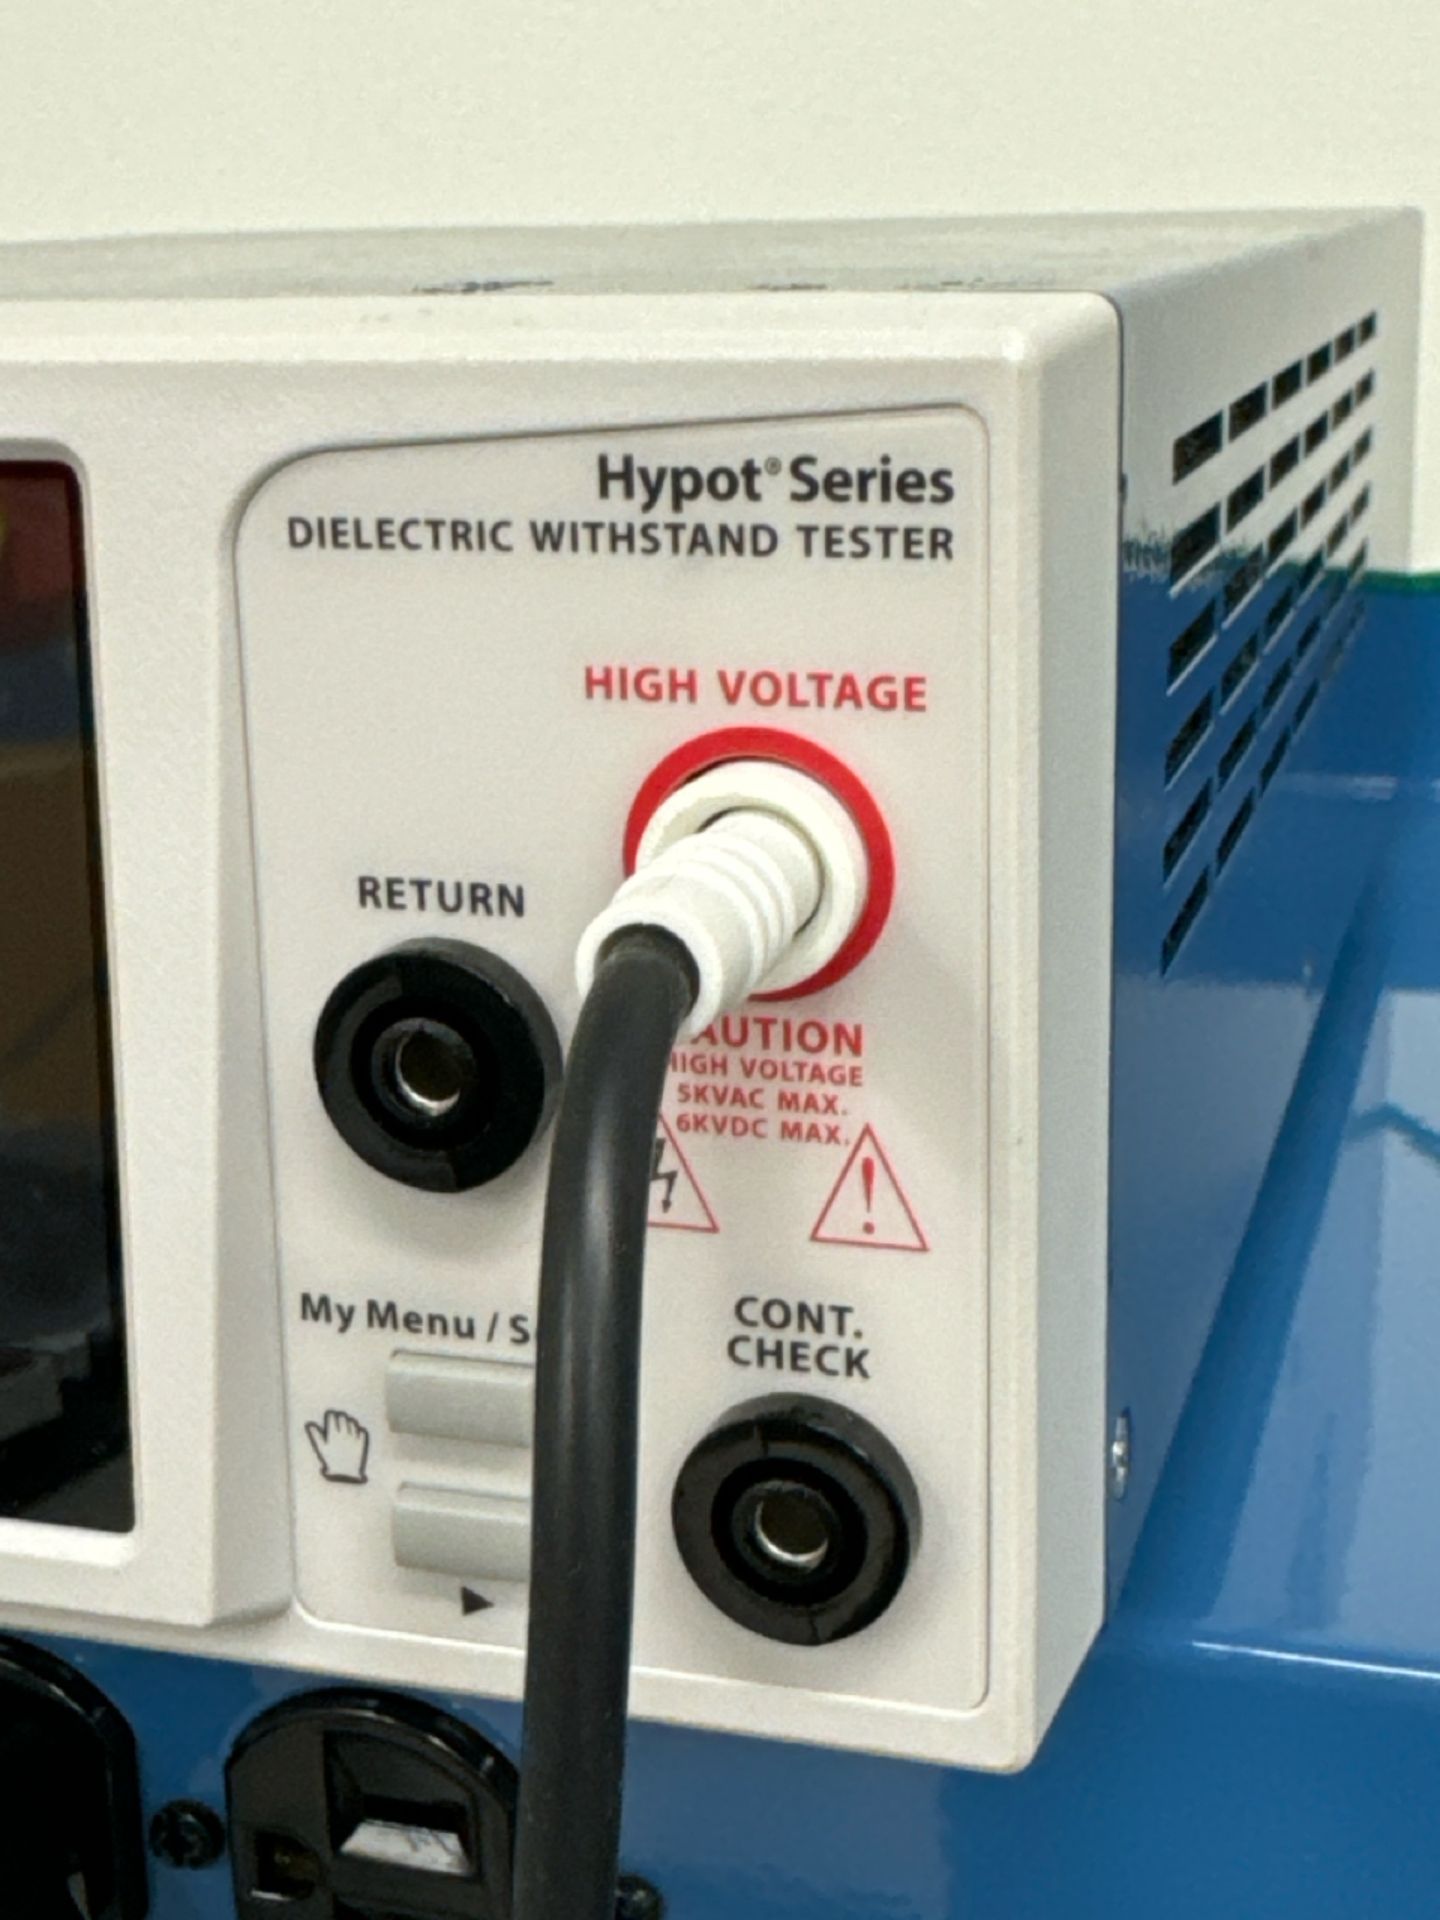 Hypot Dielectric Withstand Tester - Image 3 of 5